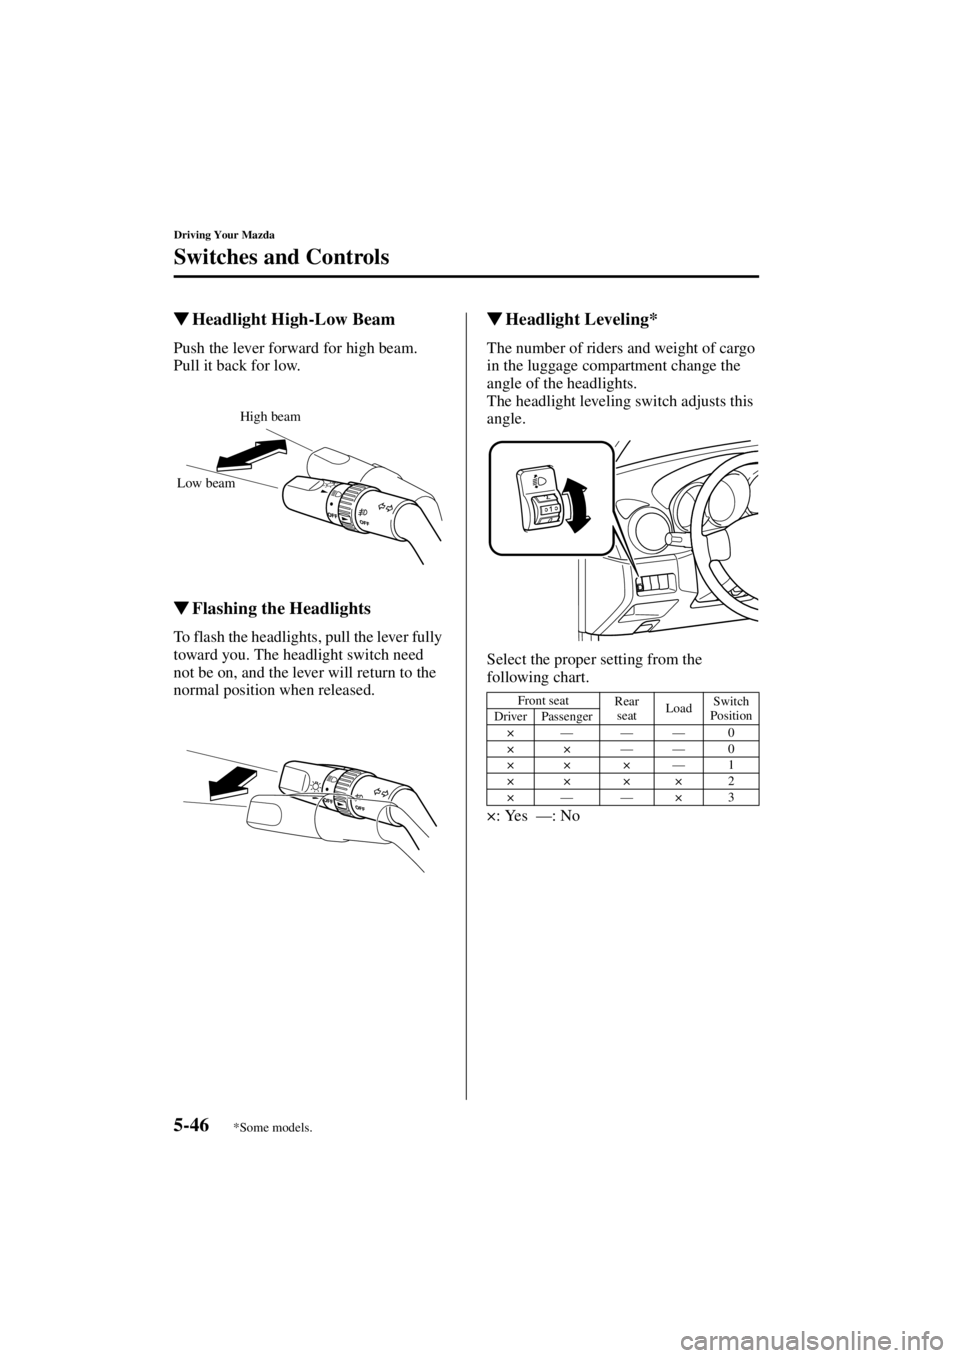 MAZDA MODEL 3 5-DOOR 2004  Owners Manual 5-46
Driving Your Mazda
Switches and Controls
Form No. 8S18-EA-03I
Headlight High-Low Beam
Push the lever forward for high beam.
Pull it back for low.
Flashing the Headlights
To flash the headlights